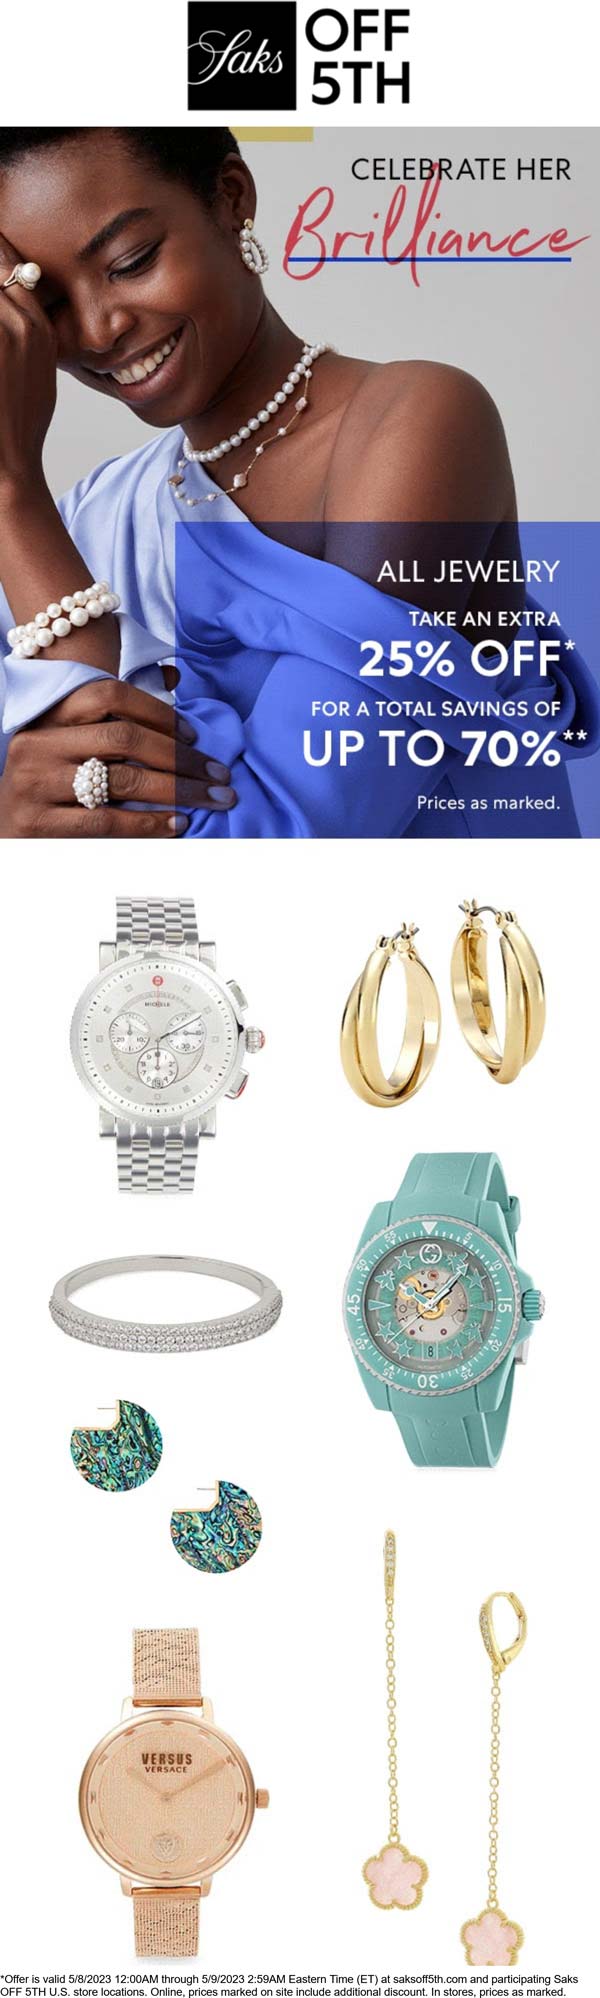 OFF 5TH stores Coupon  25% off all jewelry today at Saks OFF 5TH, ditto online #off5th 